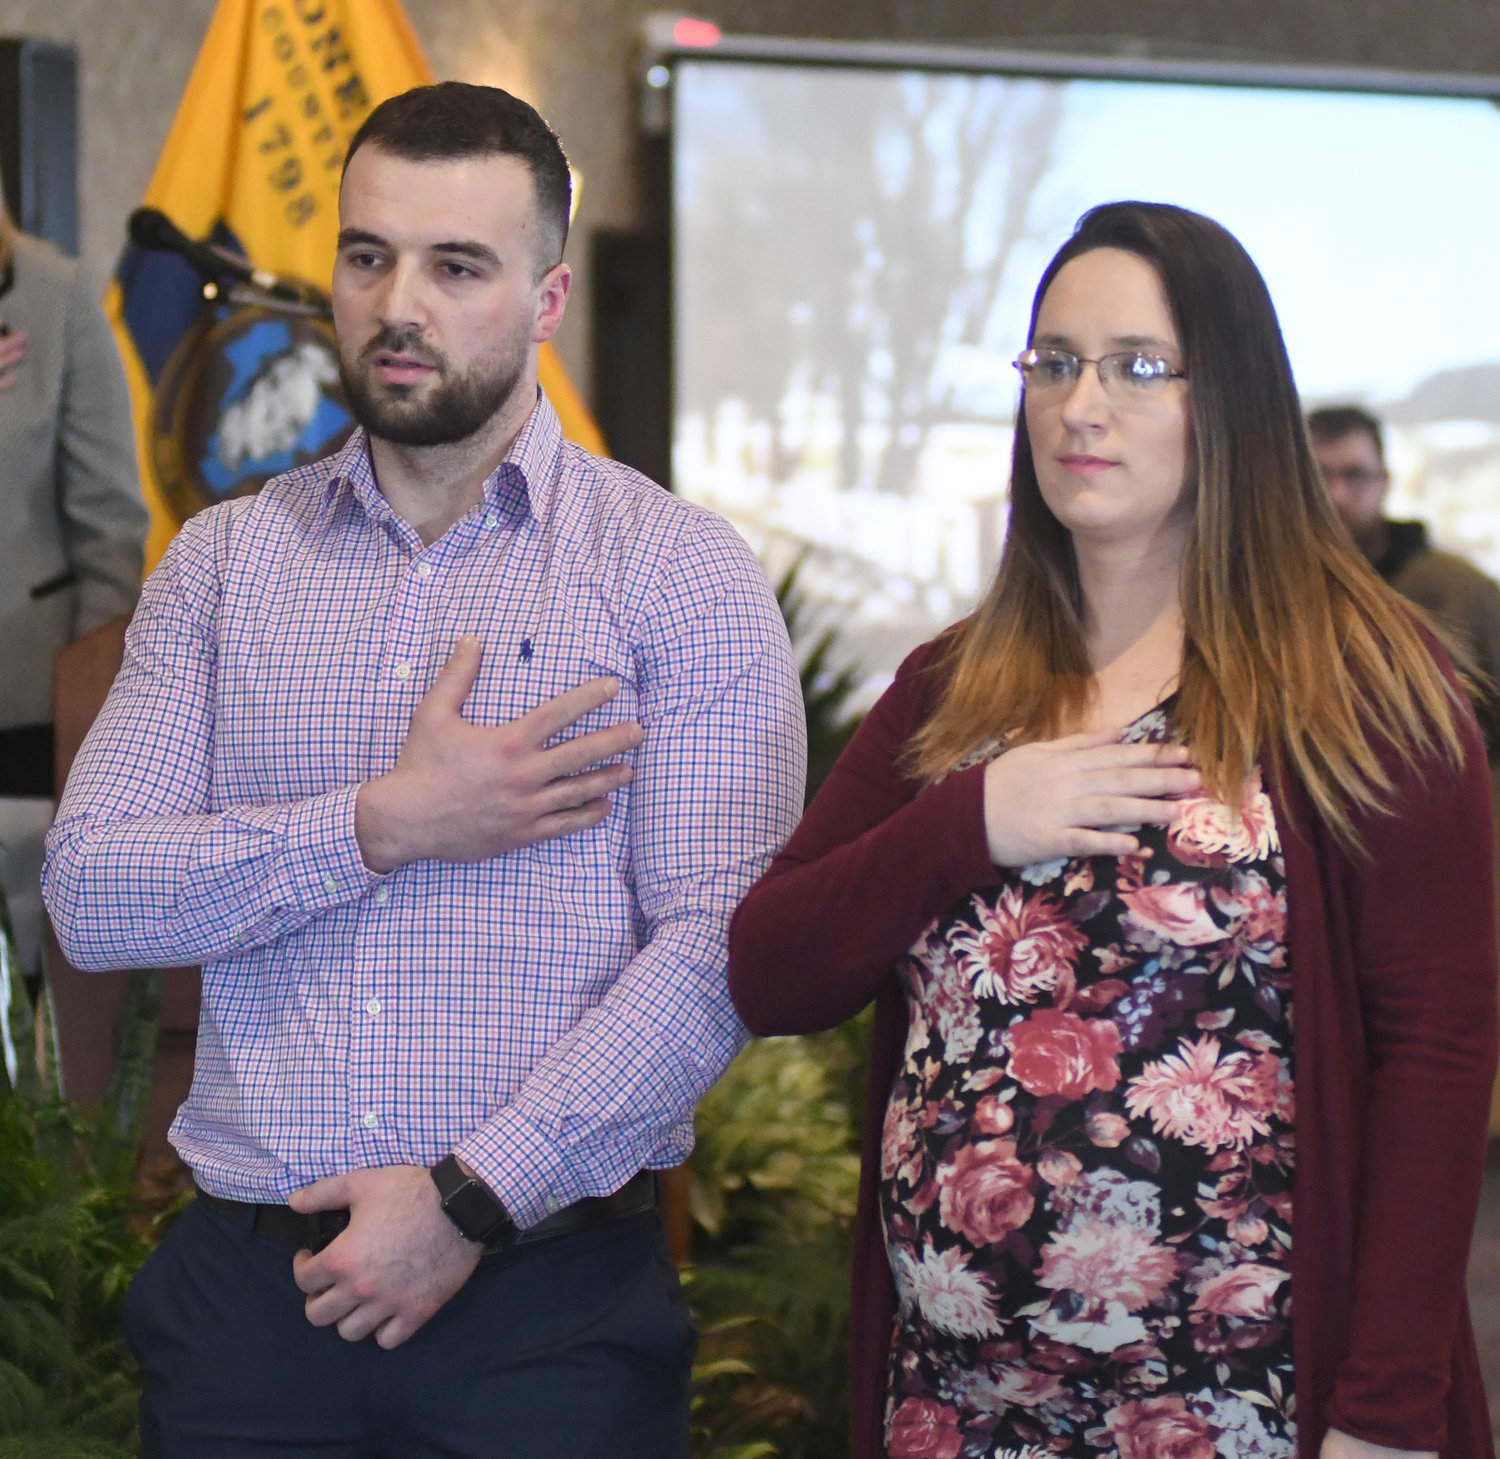 LEADING THE PLEDGE — Edin and Mahira Patkovic lead the Pledge of Allegiance at the start of Tuesday’s State of the County speech. During his speech, Oneida County Executive Anthony J. Picente Jr. discussed the Patkovics and used their story to highlight the need for services for refugees, including English lessons for non-native speakers.